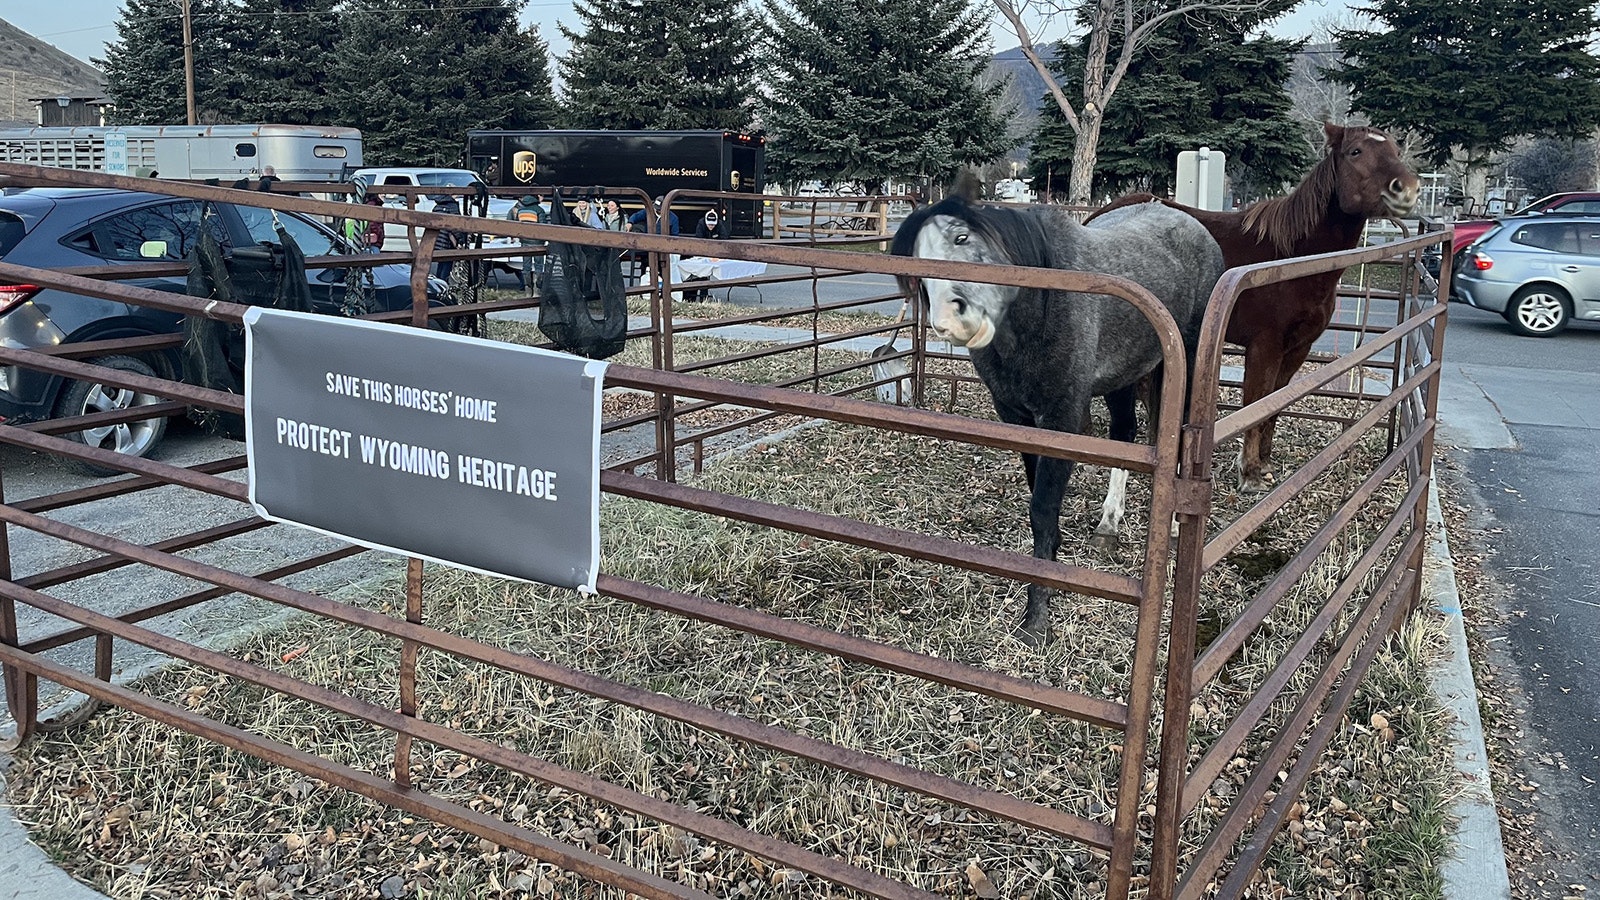 JH Outfitting Co. brought a couple of its horses to make a statement at Thursday's public meeting on the potential auction of the Kelly parcel in Grand Teton National Park.